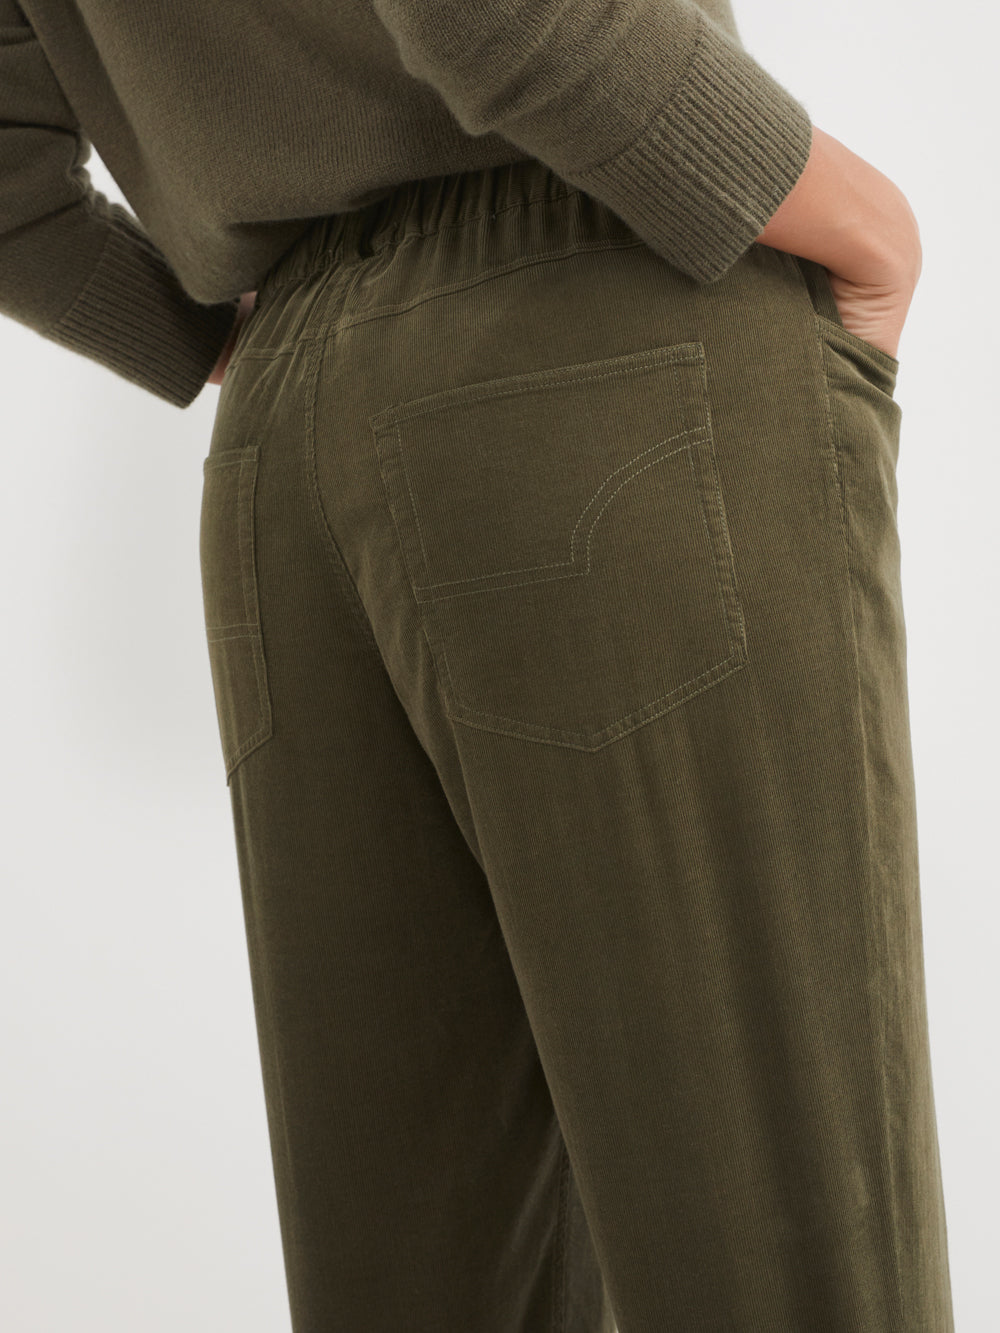 The Soft Washed Cord Pant